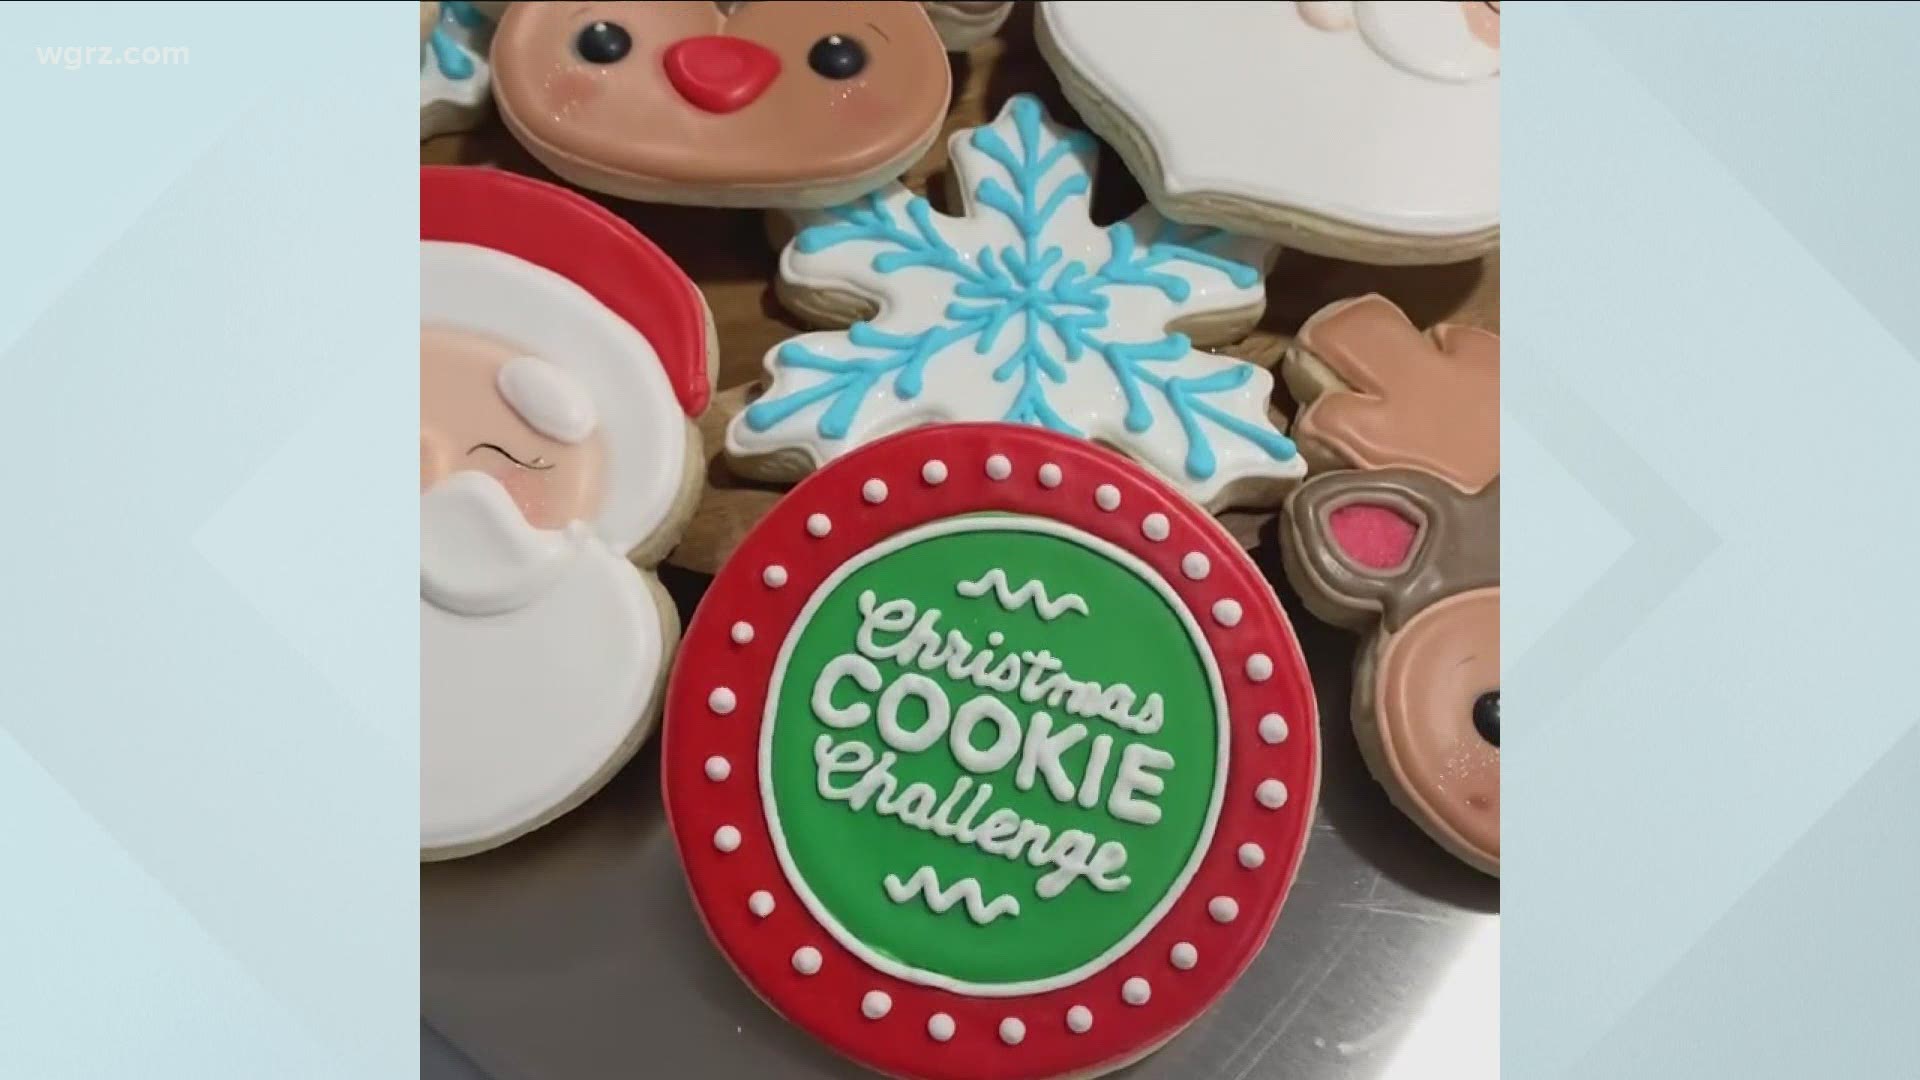 Brian Muffoletto, a second-grade teacher at Eggert Town Road Elementary, will compete in the "Christmas Cookie Challenge" Monday night.